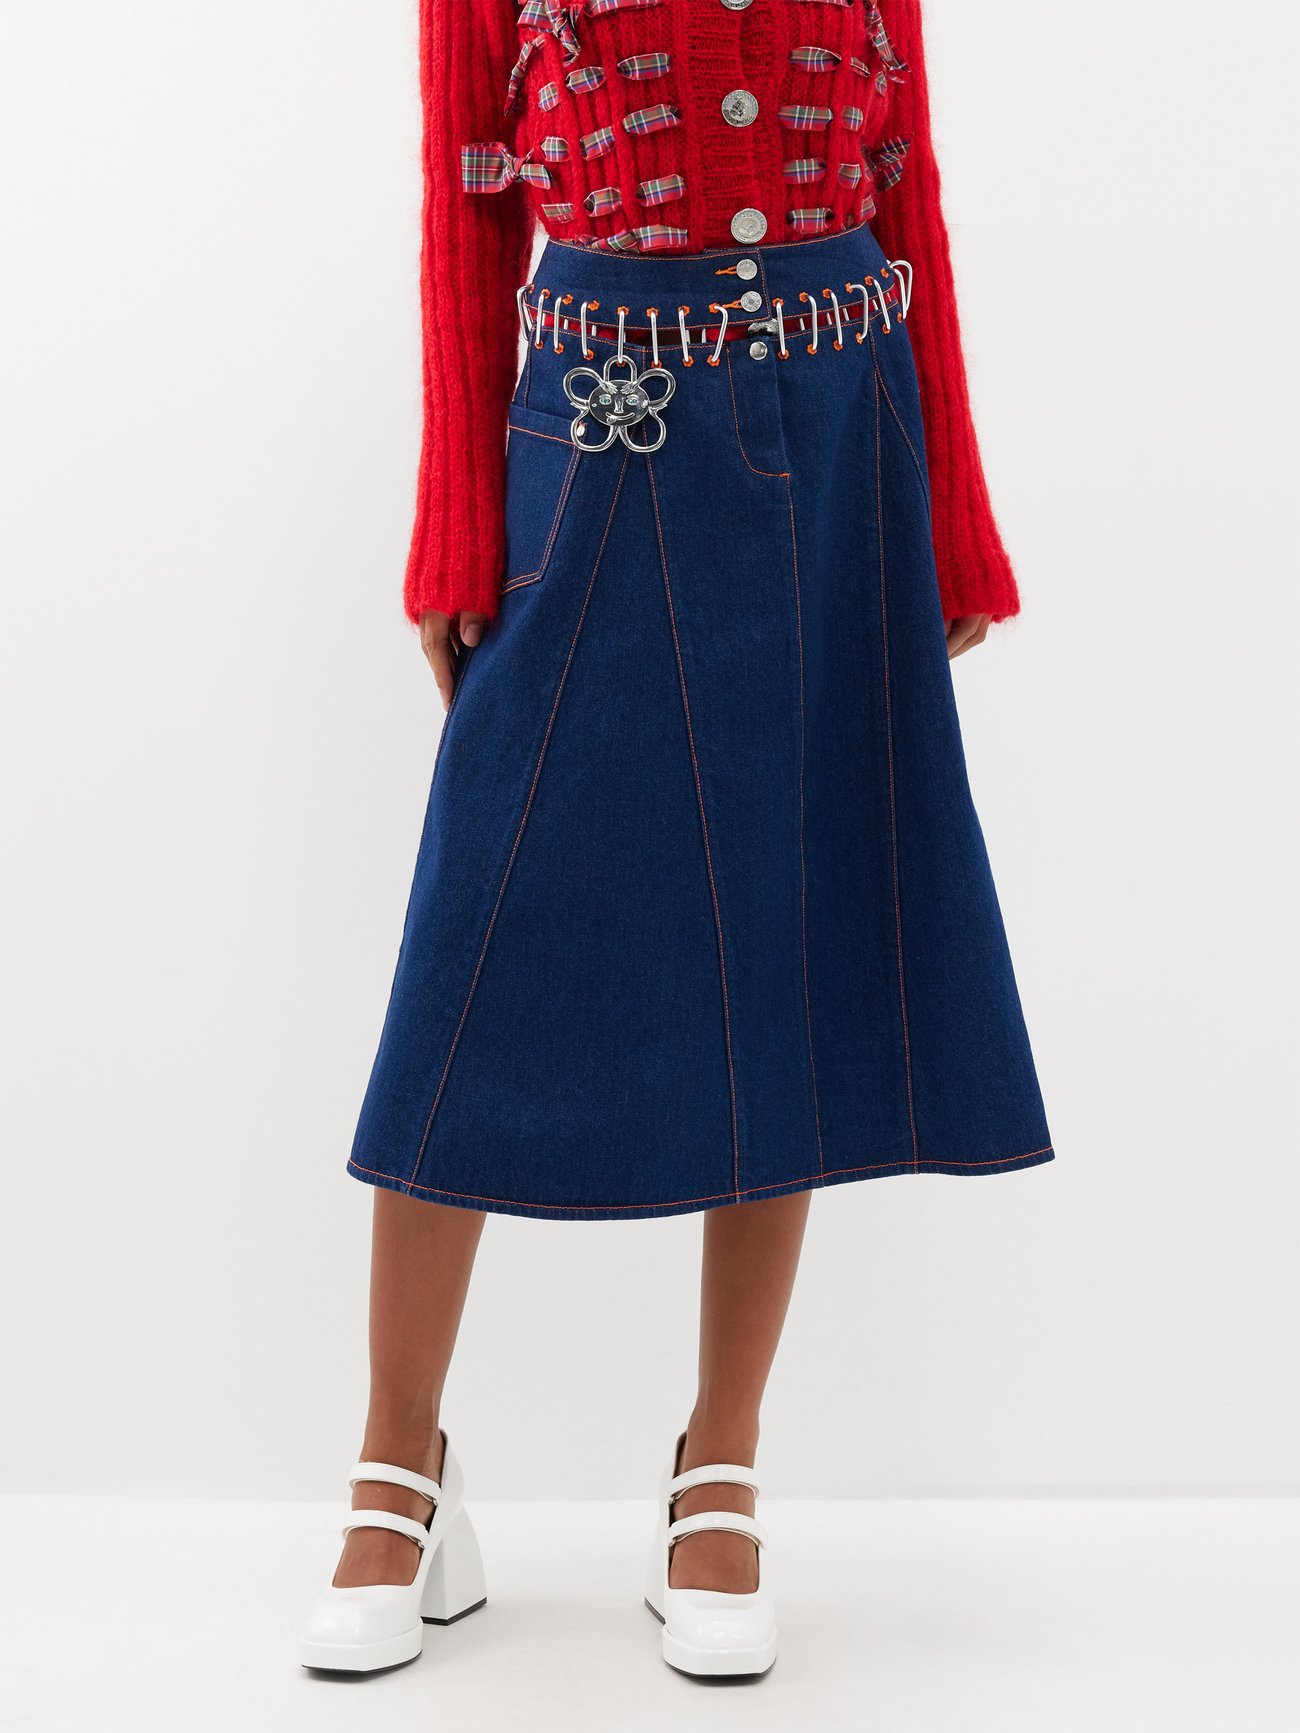 Chopova Lowena taps into 1980s rock-climbing tropes with the silver-tone carabiner embellishments on this blue denim Nosebutte midi skirt, highlighting the label's avant-garde aesthetic.